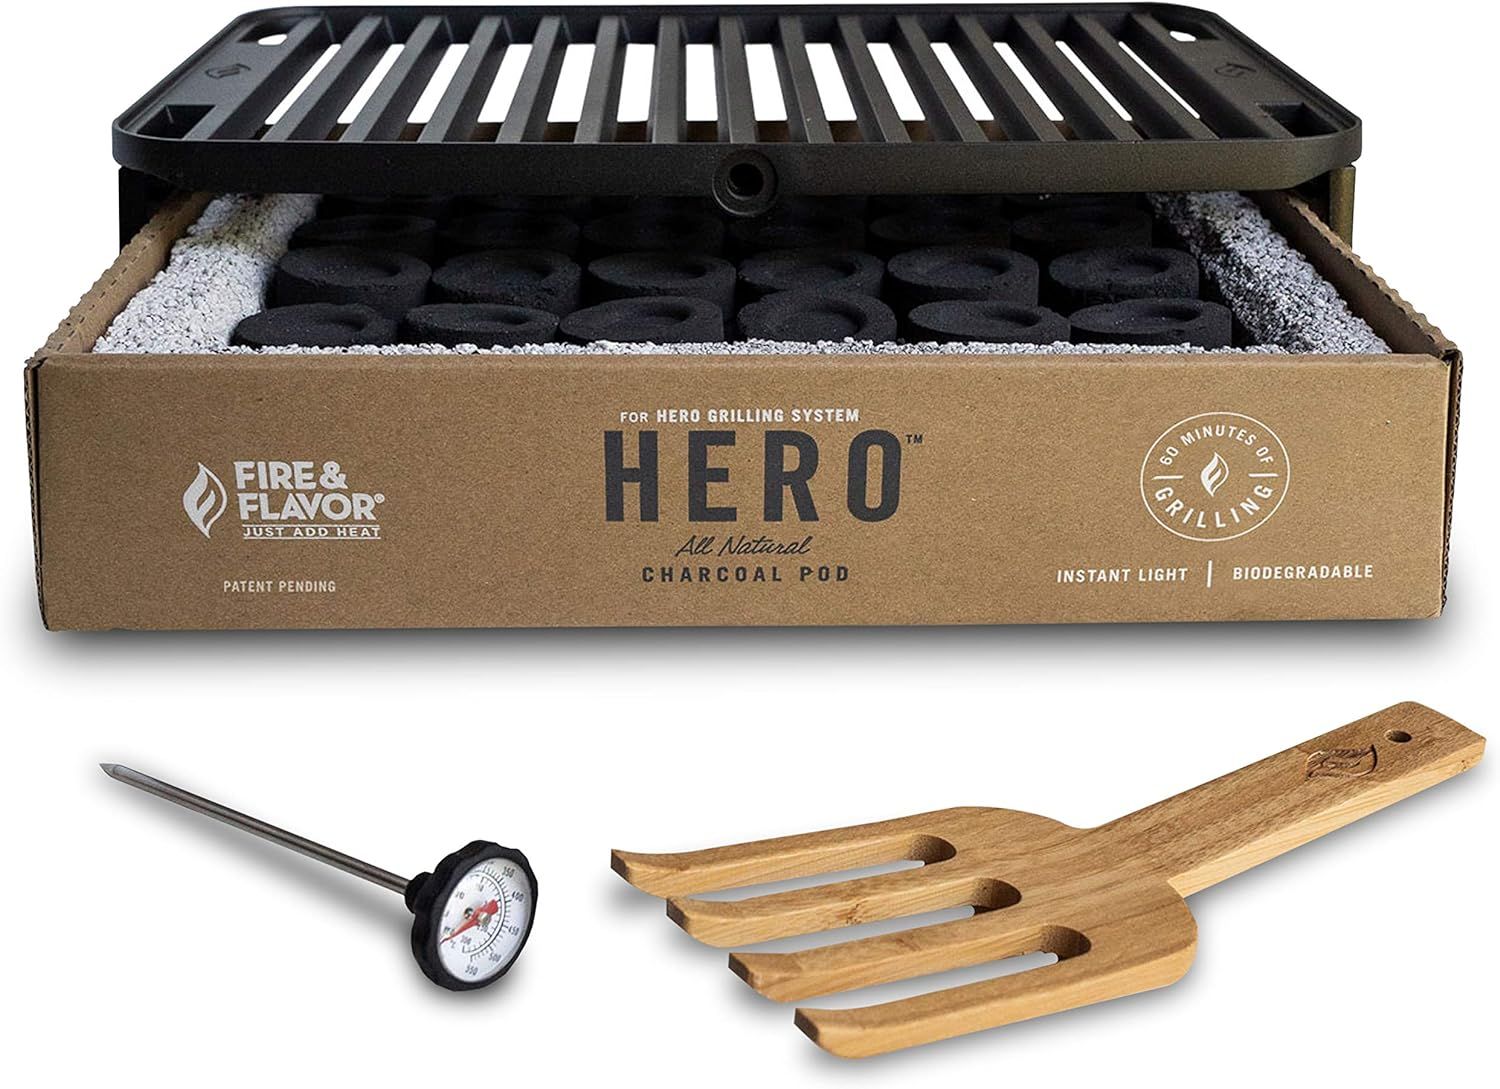 Fire & Flavor HERO Grill Kit Ultra-Portable Easy Instant Light Charcoal Grilling for Tailgating, ... | Amazon (US)